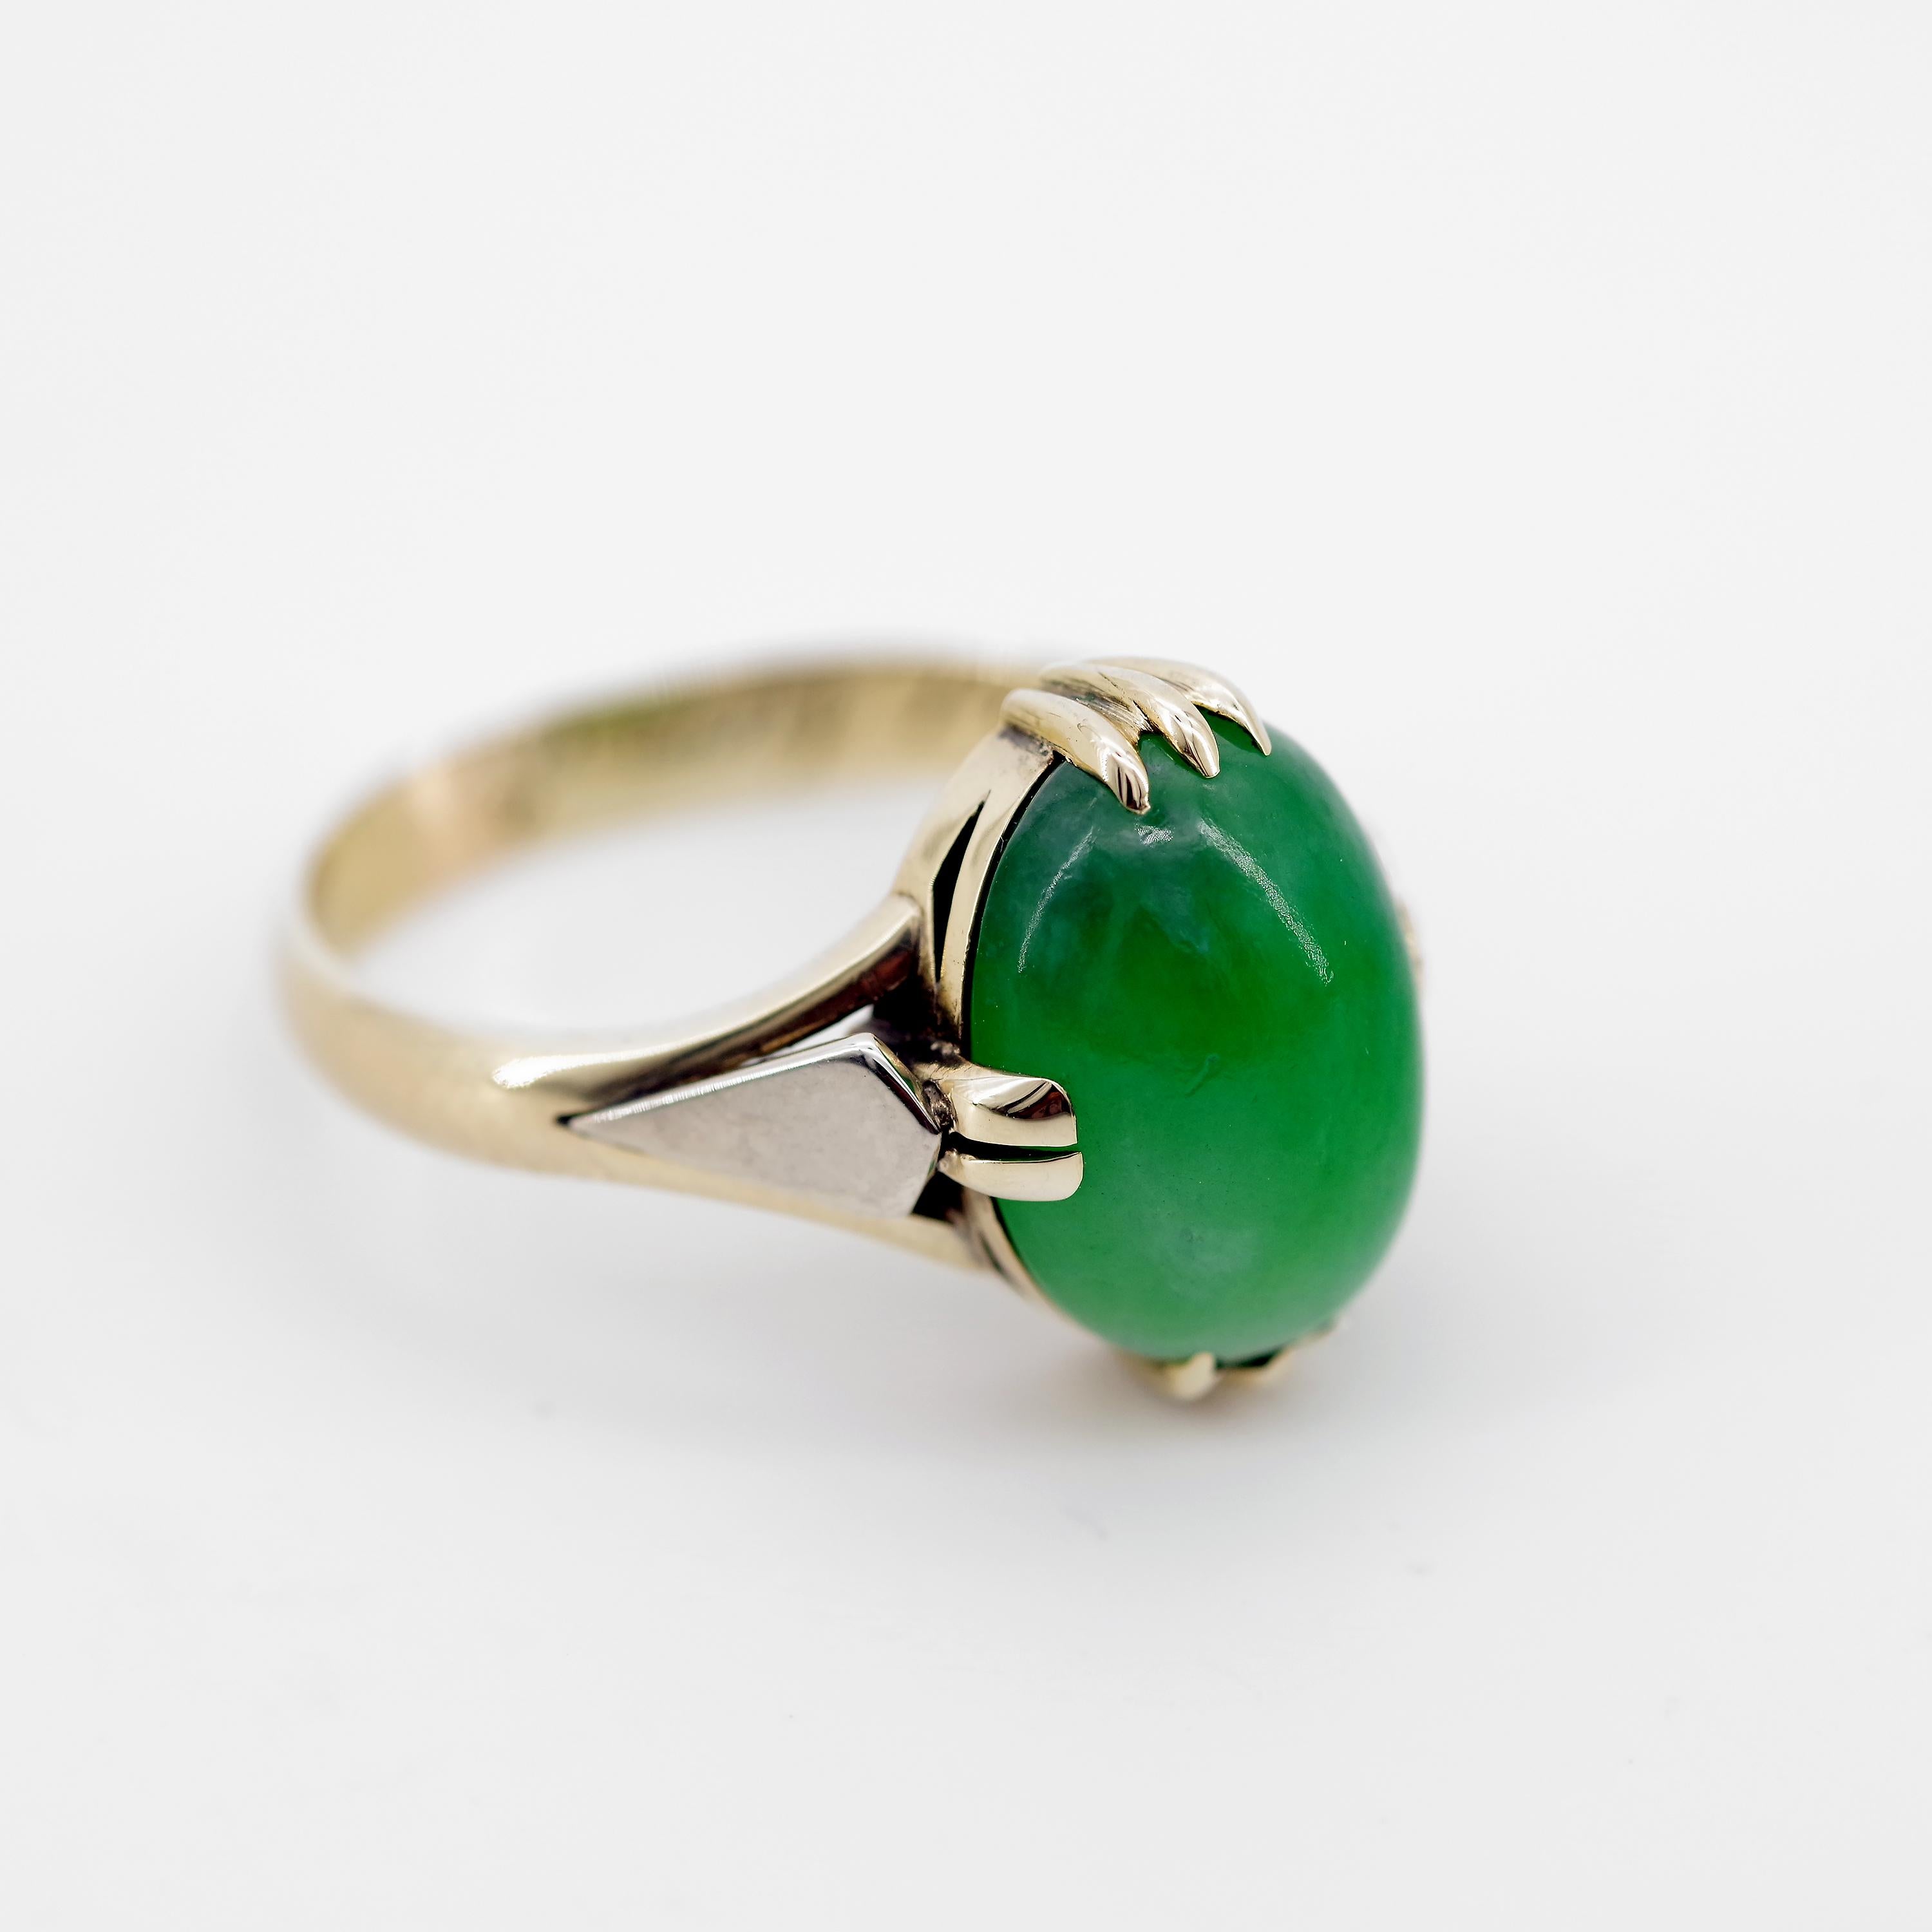 I entered a wormhole not long ago when I became obsessed with all things Japanese Art Deco. That's how I discovered this ring (in the most unlikely place, but that's a whole other story), which truly captures the distinctive elegance and regality of